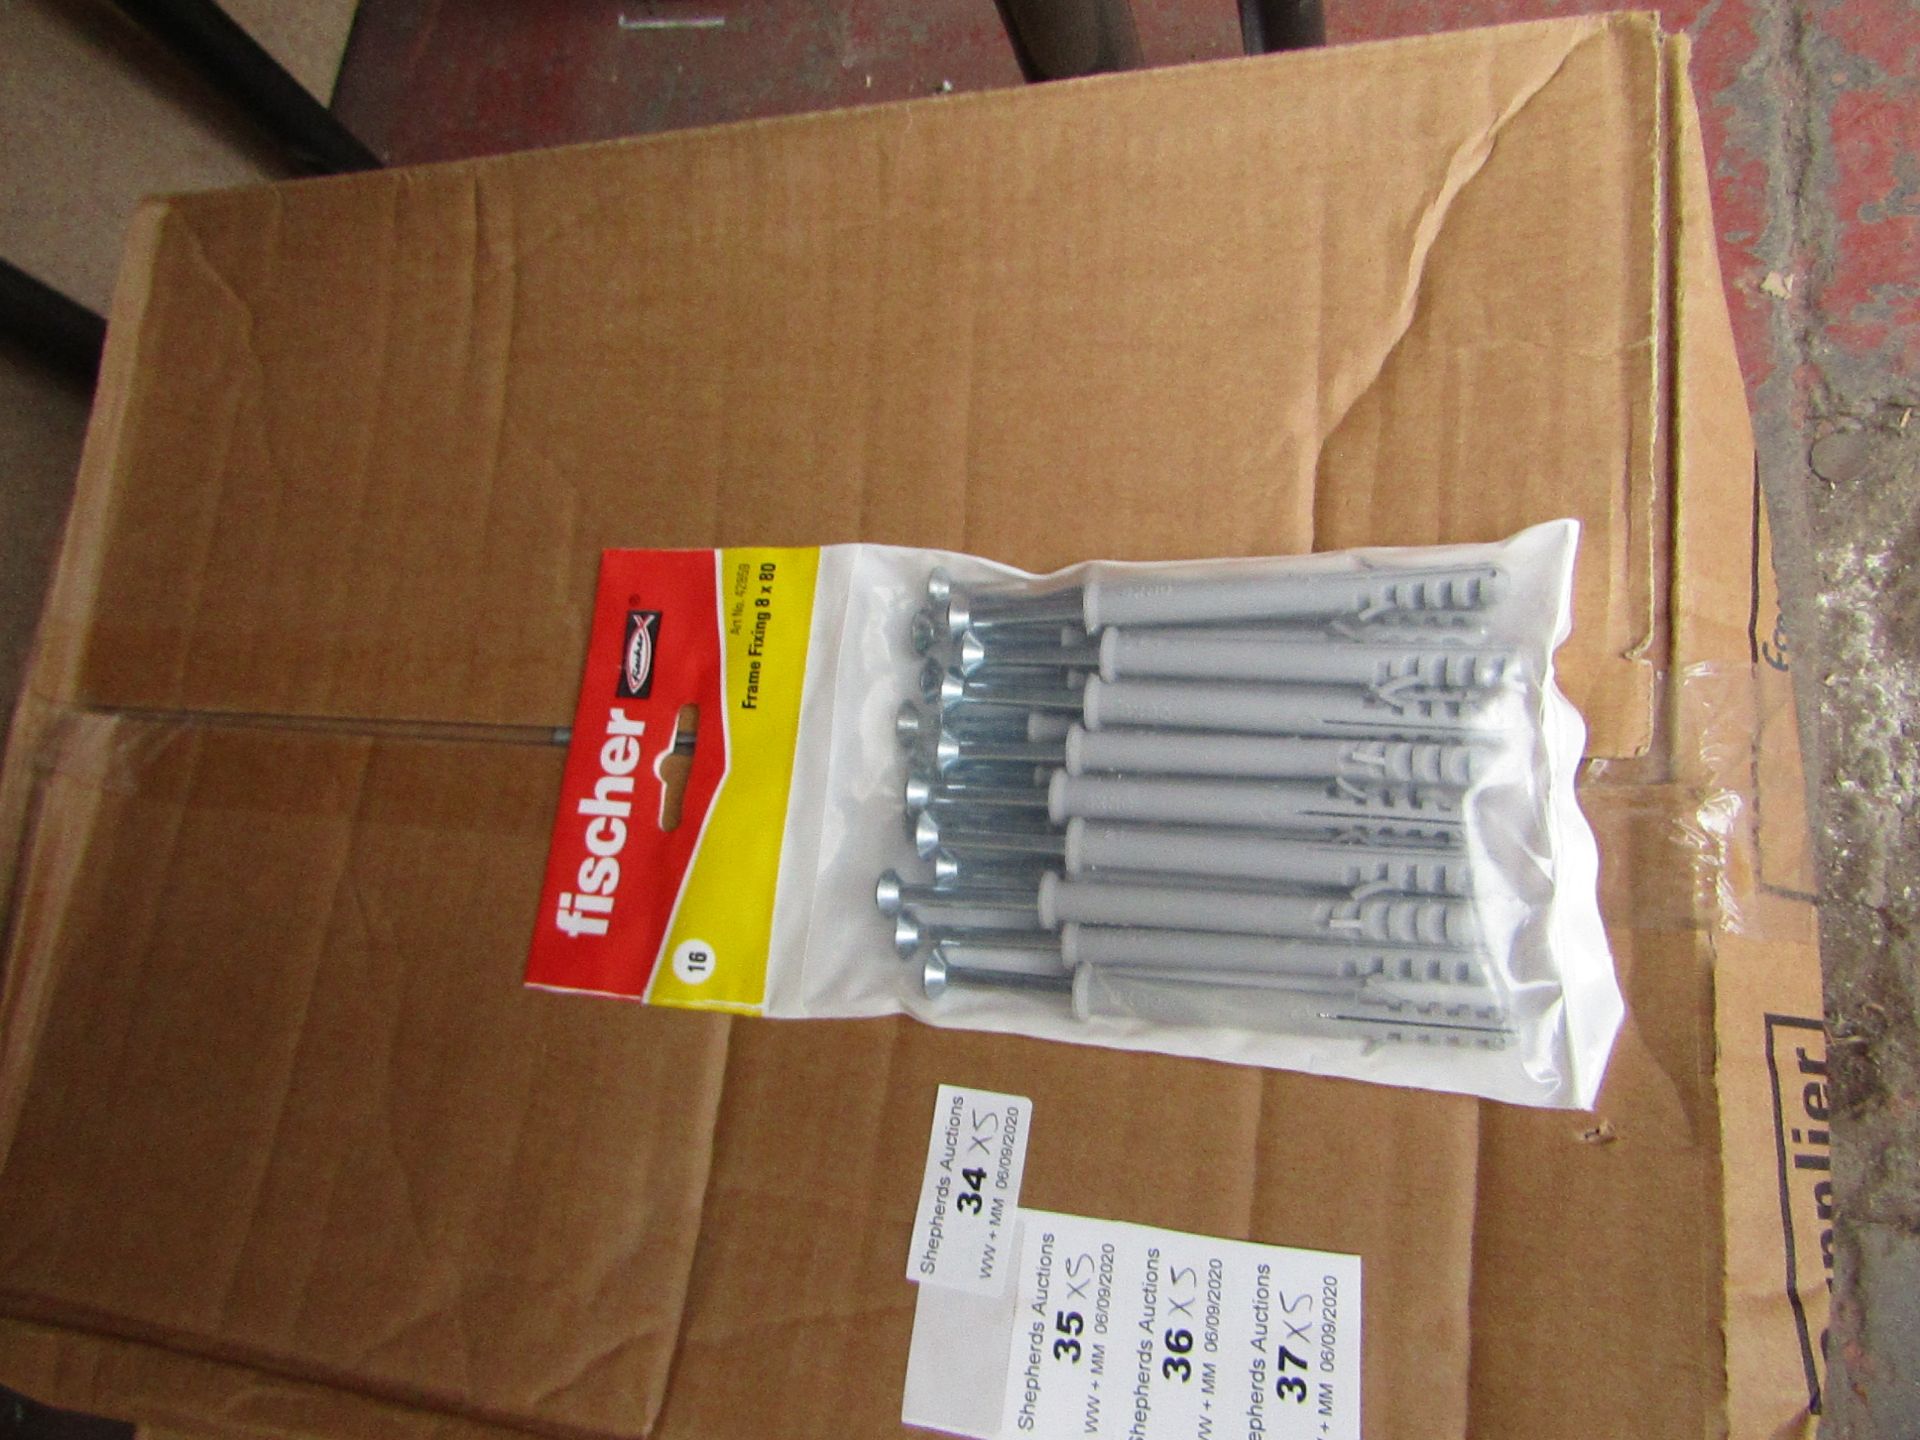 5x Fischer - Frame Fixing 8 x 80 (Packs of 16) - New & Packaged.